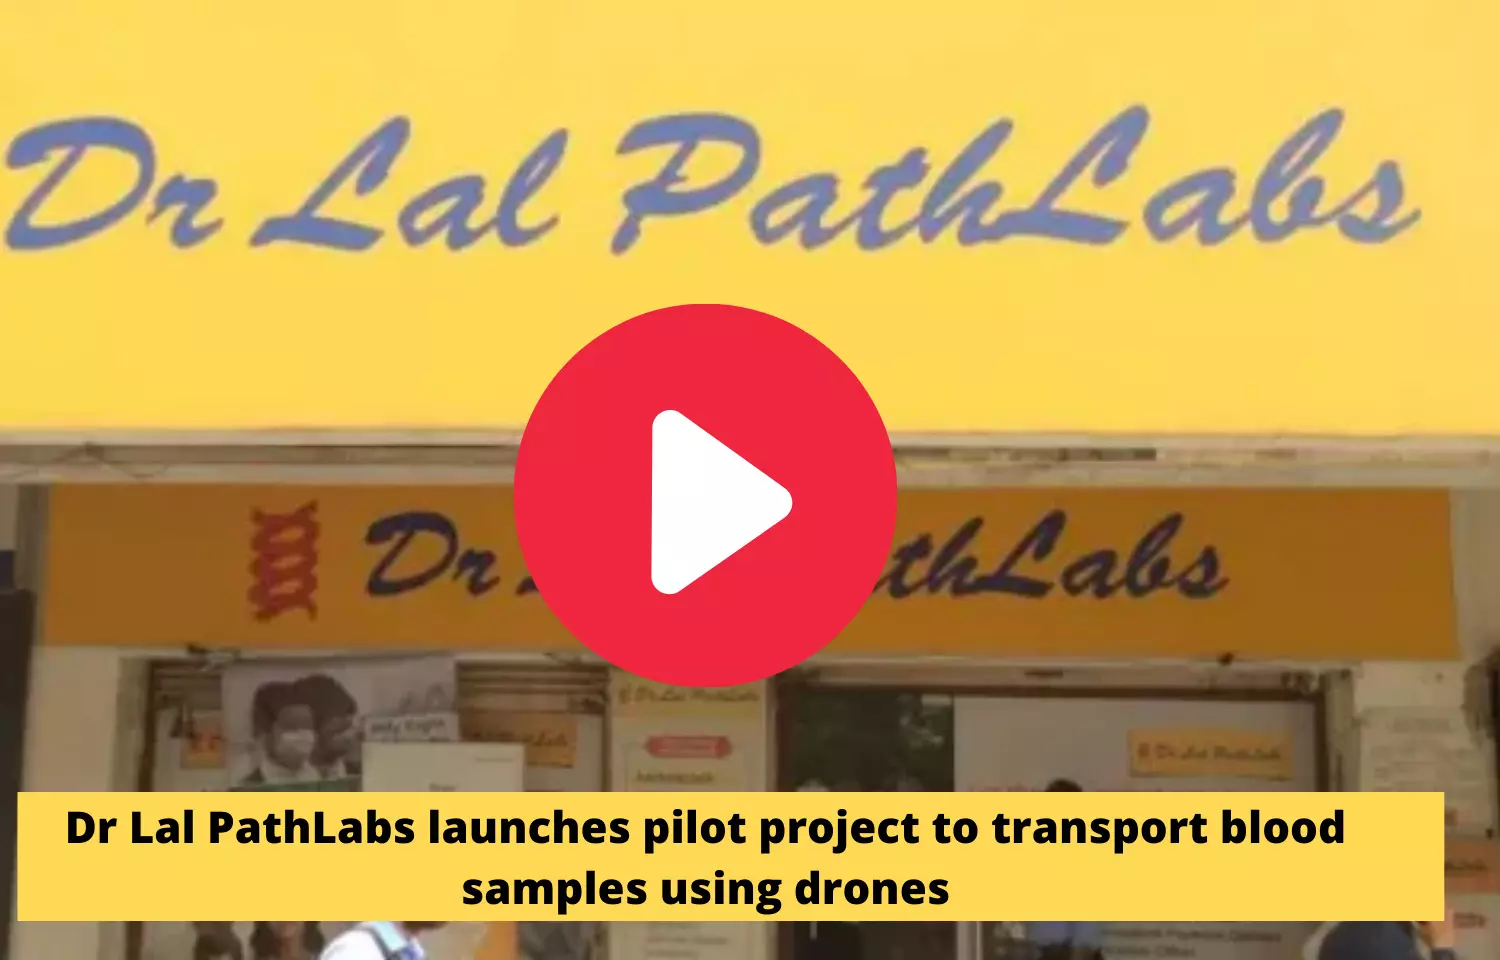 Dr Lal PathLabs launches pilot project to transport blood samples using drones